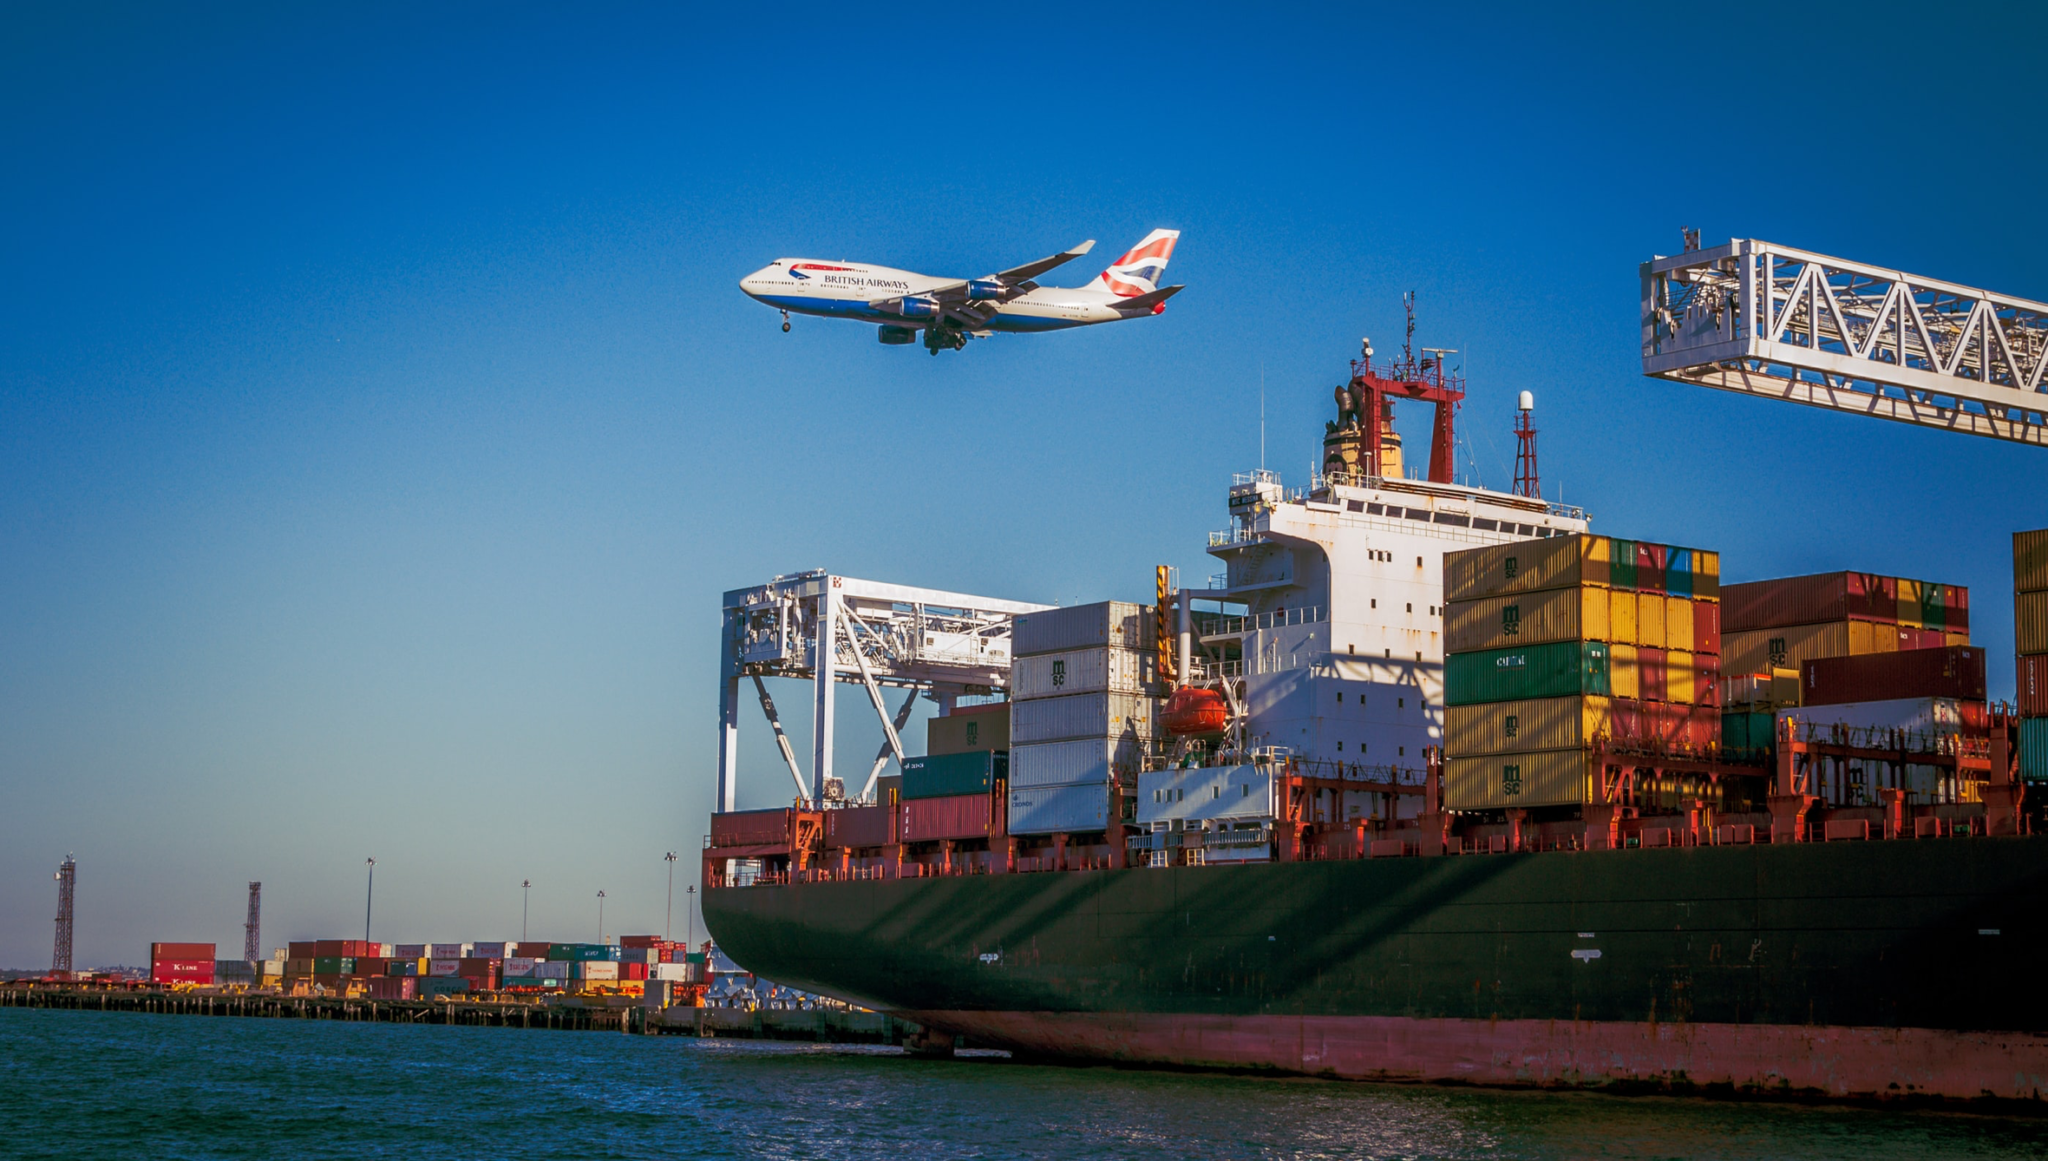 Airplane and cargo freighter fulfilling ecommerce orders.